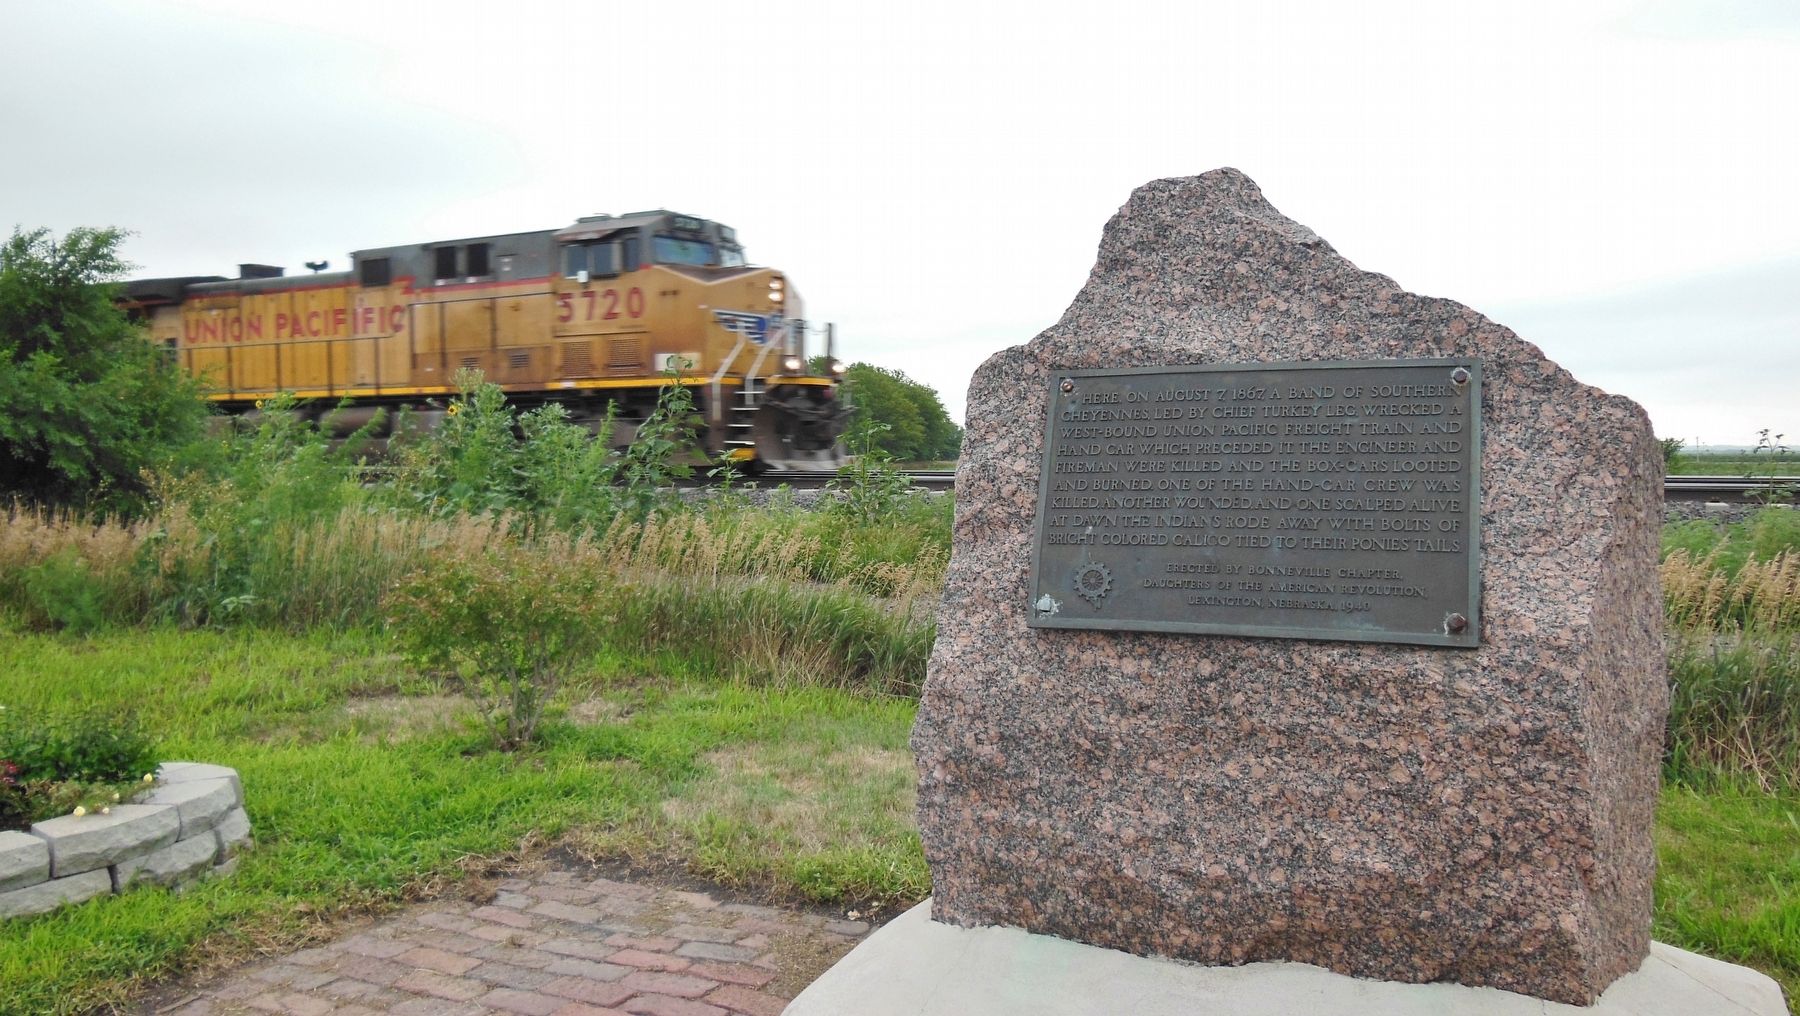 West-bound Union Pacific freight train passing the marker, 146 years later! image. Click for full size.